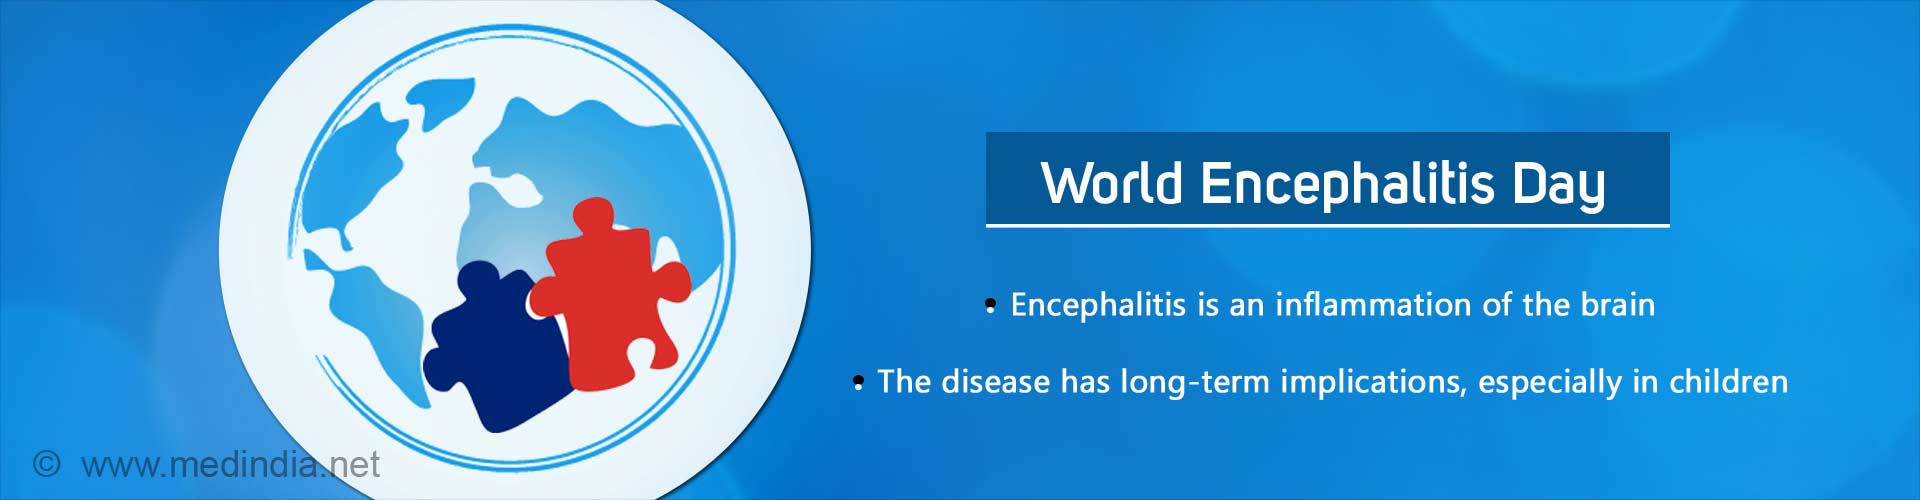 world encephalitis day
- encephalitis is an inflammation of the brain
- the disease has long-term implications, especially in children